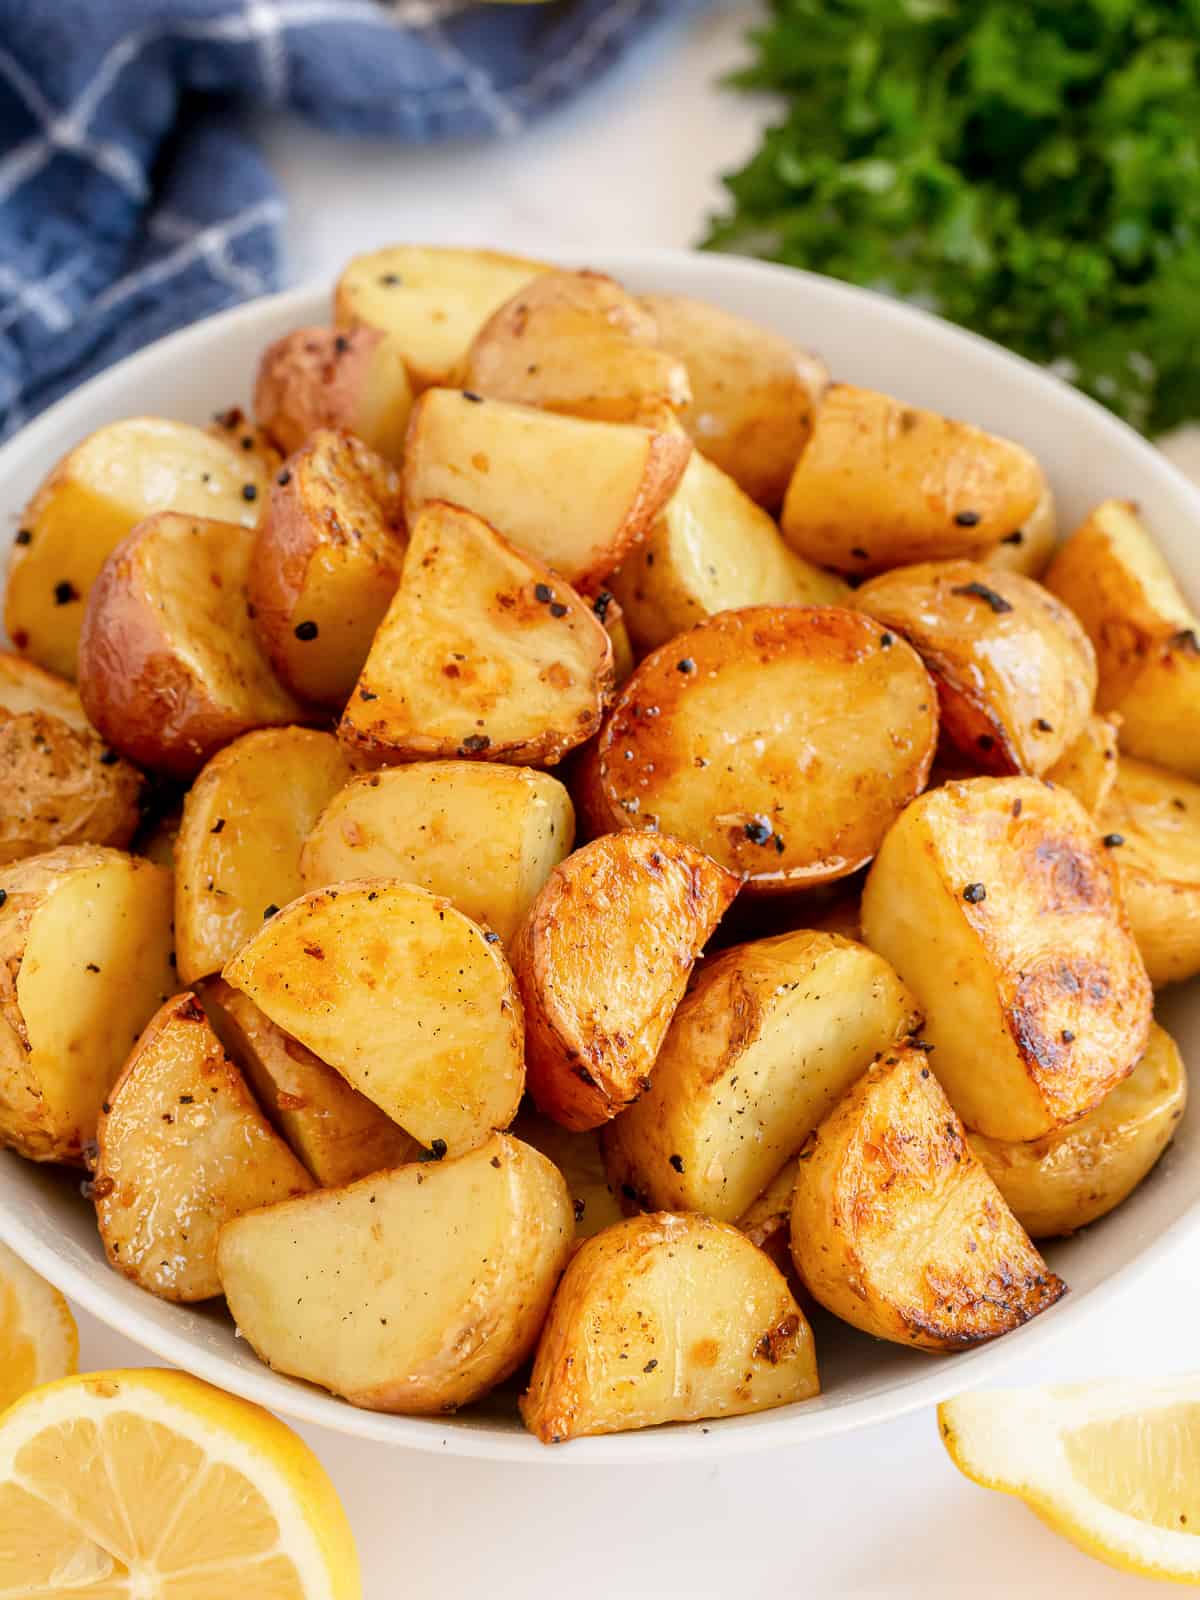 Roasted lemon and garlic potatoes in a white bowl next to lemon wedges and parsley.